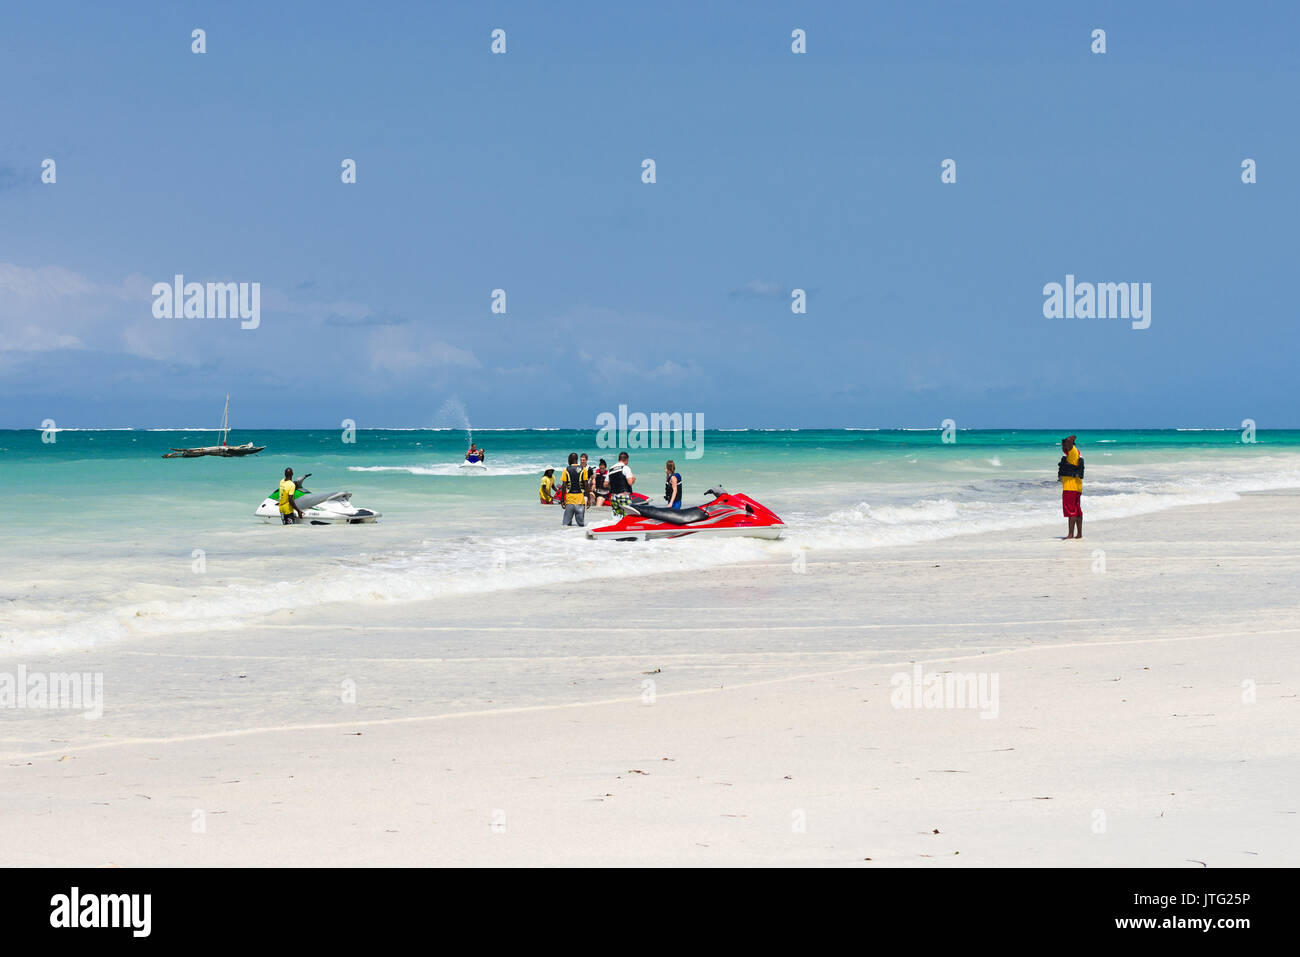 People on beach and in water unloading jet skis in to the ocean, Diani, Kenya Stock Photo